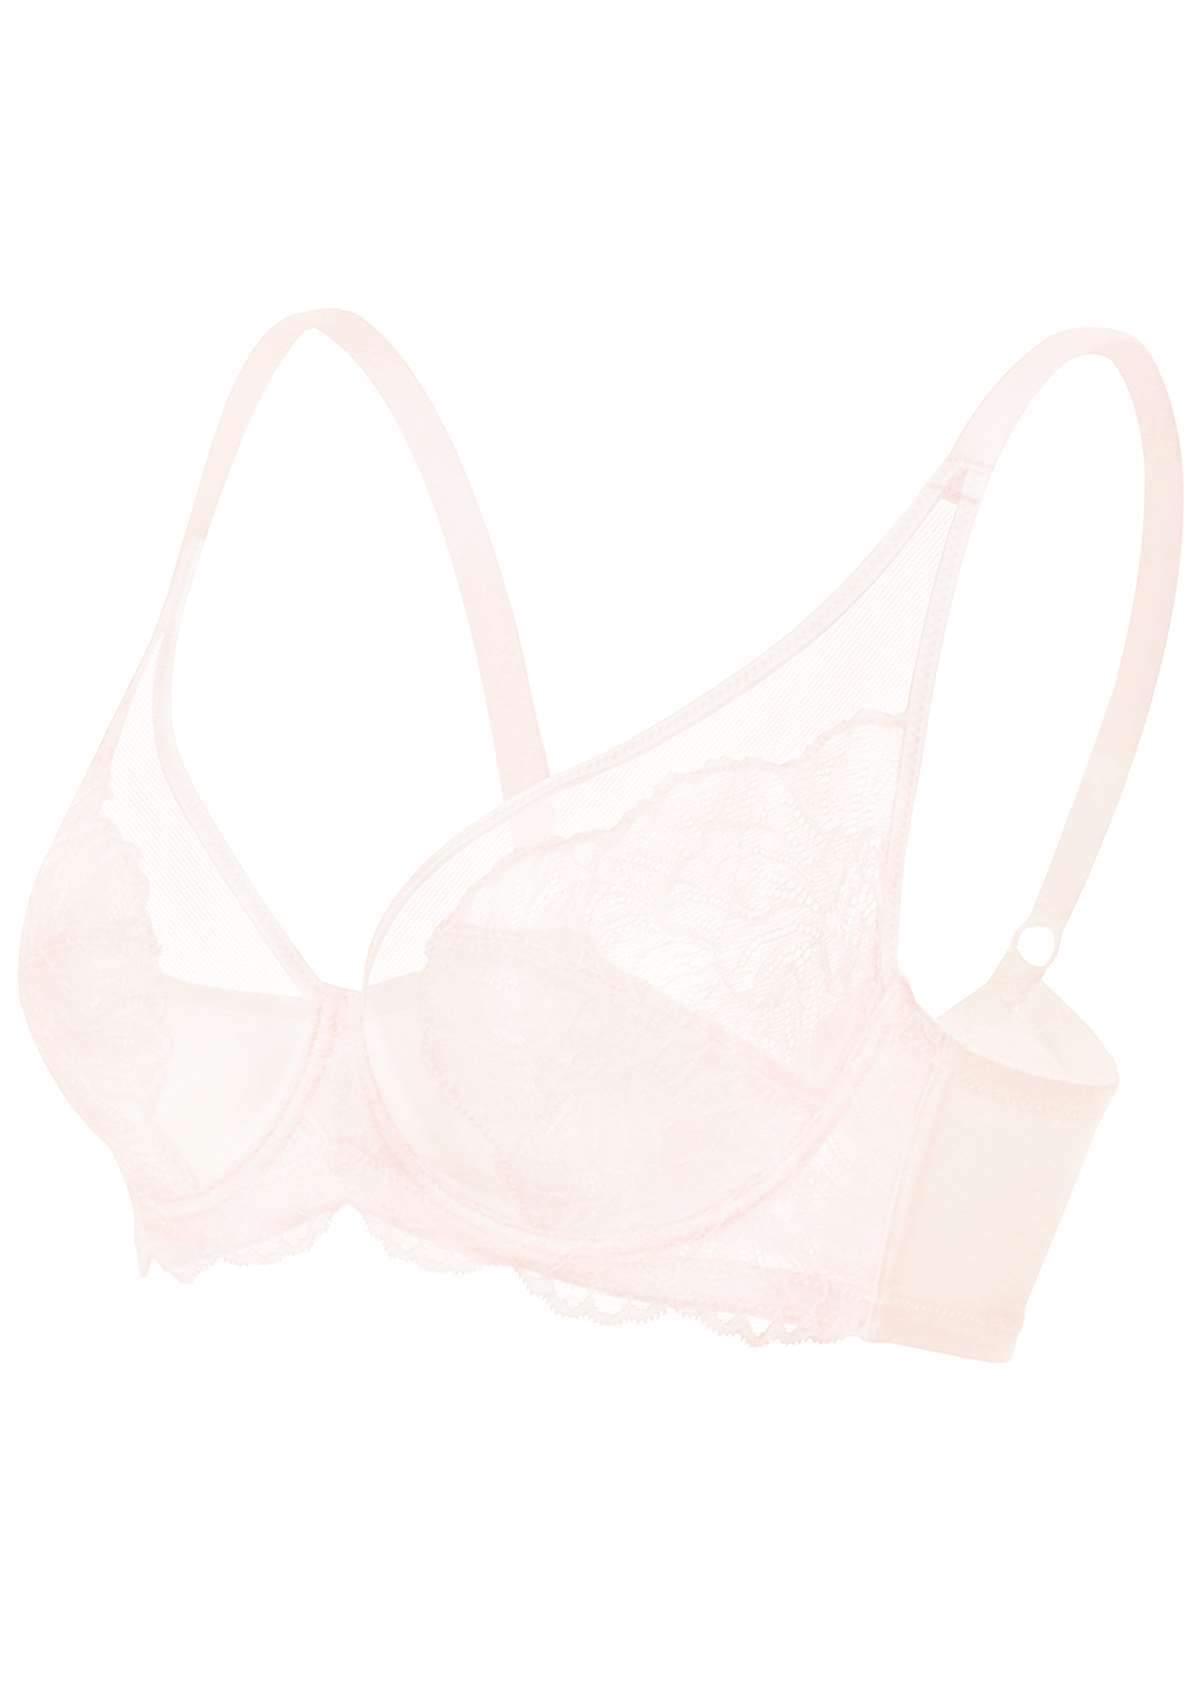 HSIA Blossom Sheer Lace Bra: Comfortable Underwire Bra For Big Busts - White / 34 / DDD/F